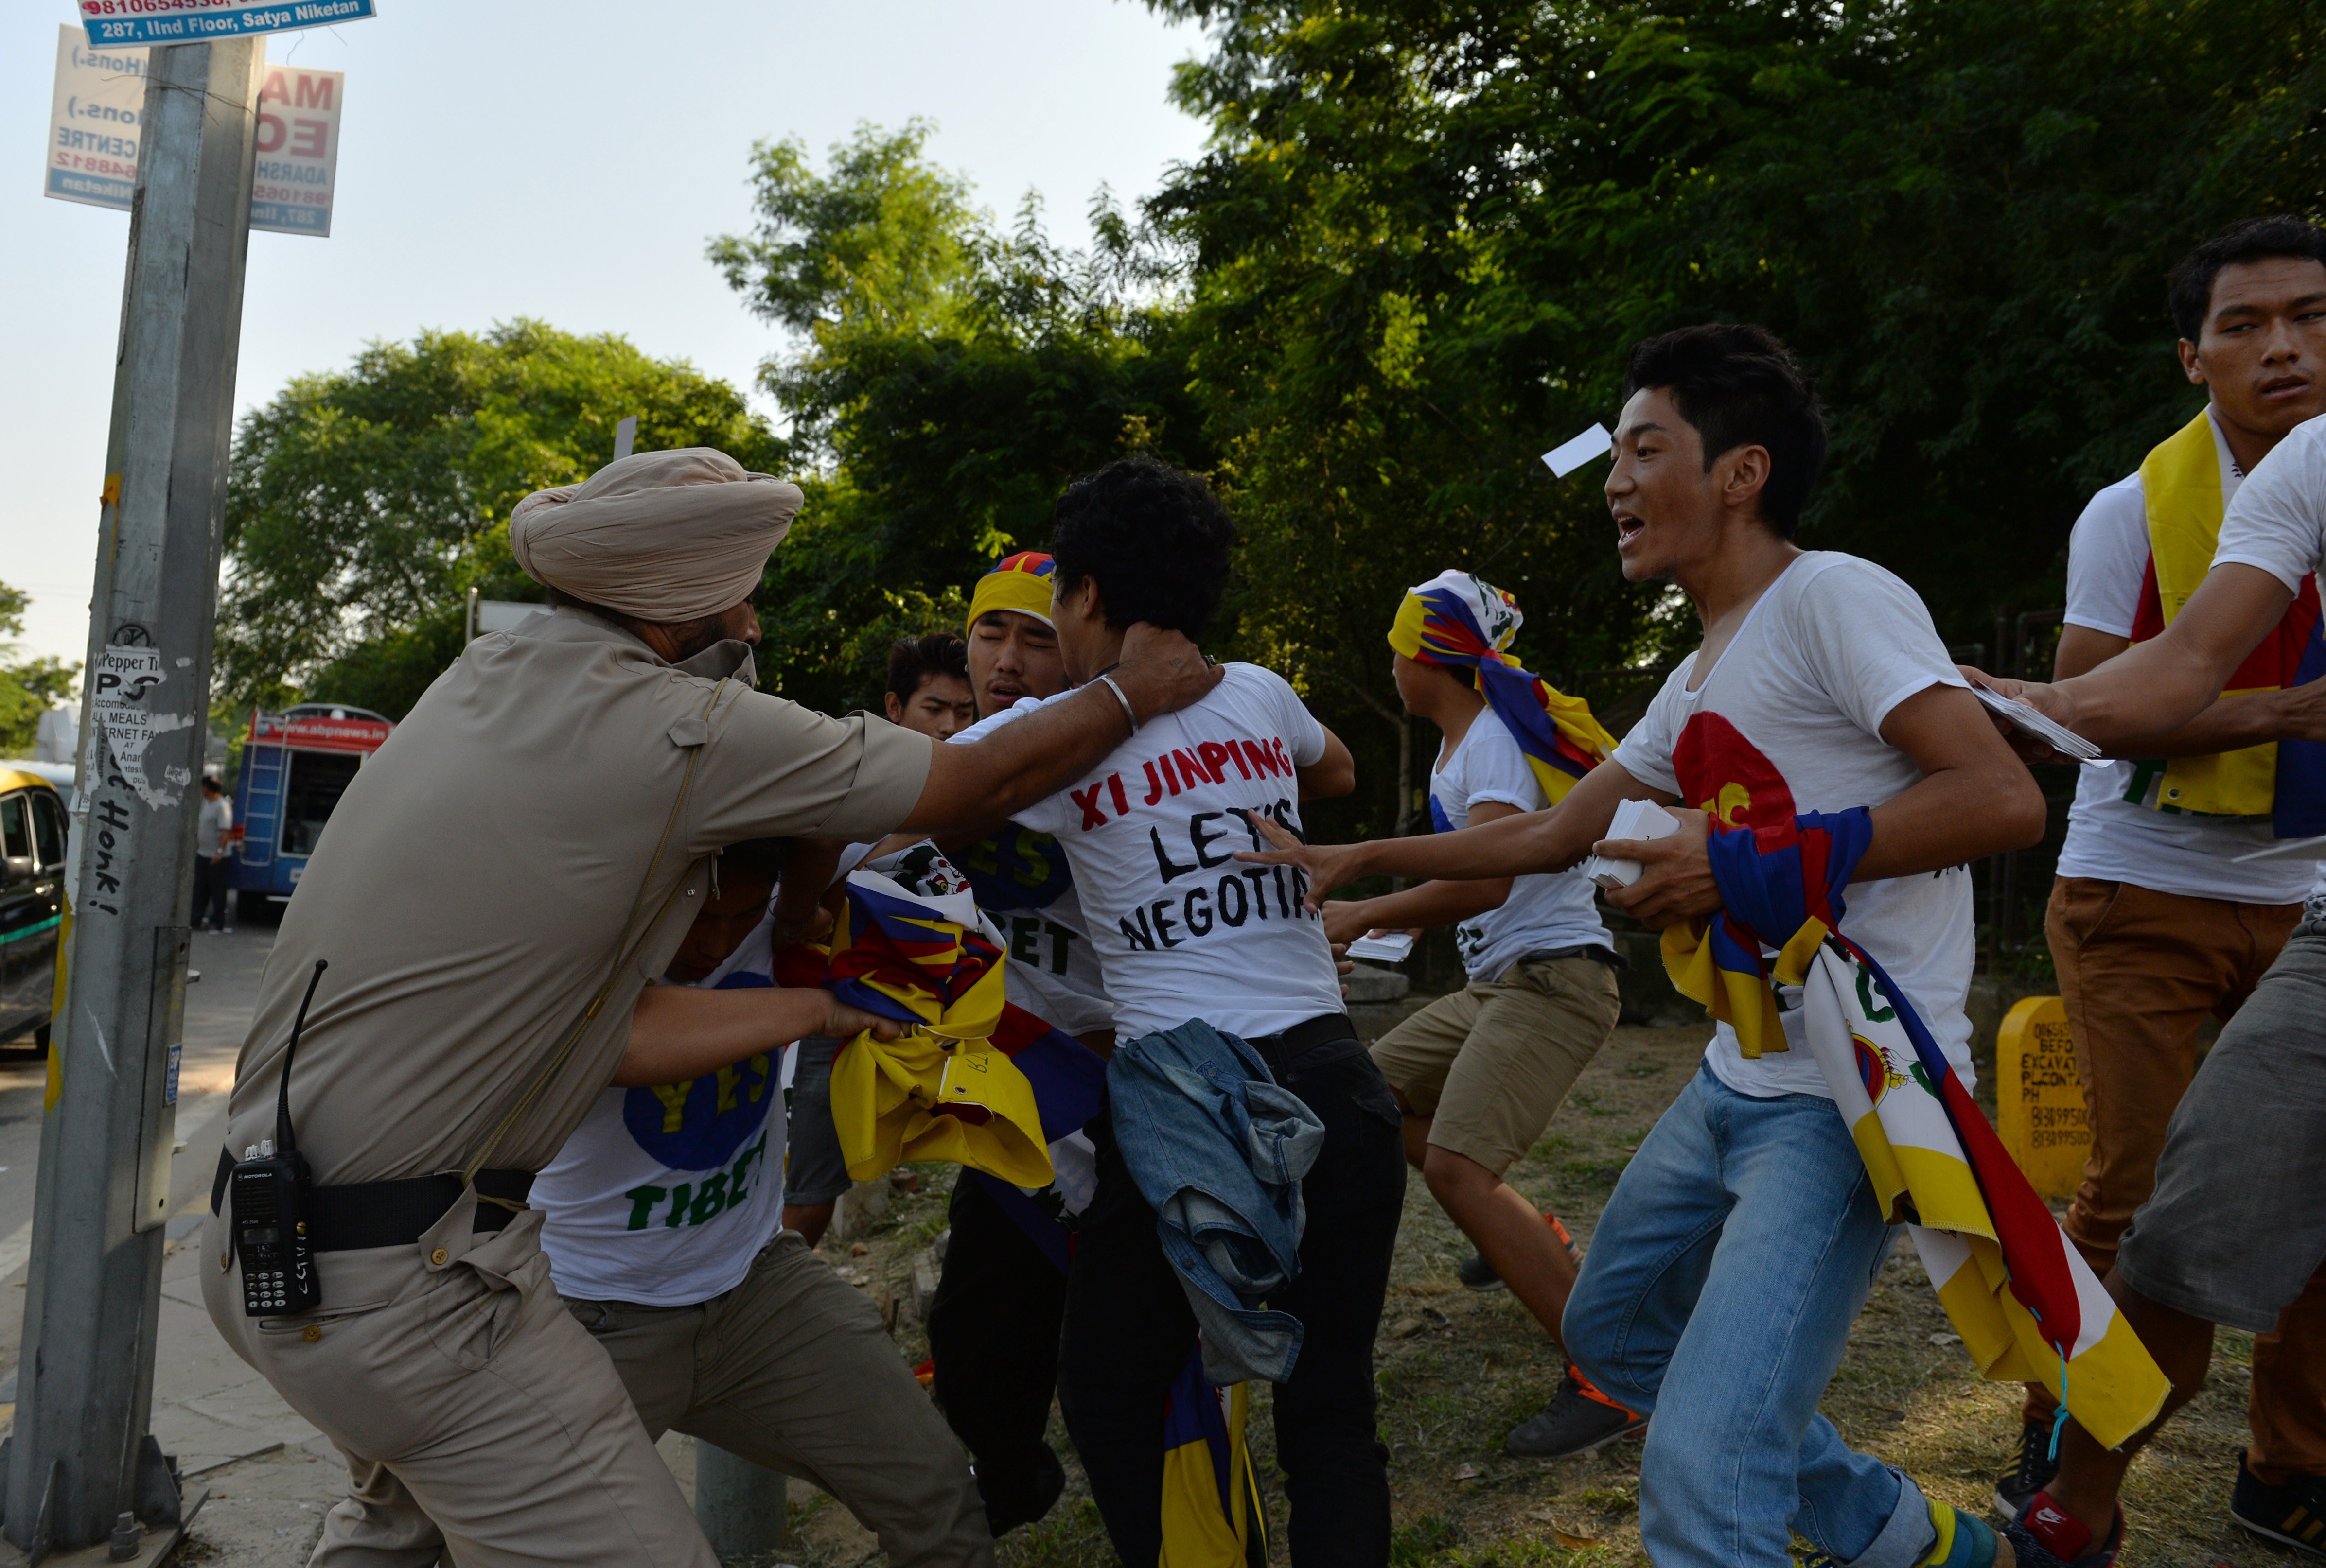 Indian police try to prevent exiled Tibetan youths from advancing as they protest against a visit to India by Chinese President Xi Jinping outside a hotel in New Delhi on Sept. 18, 2014 (Chandan Khanna—AFP/Getty Images)